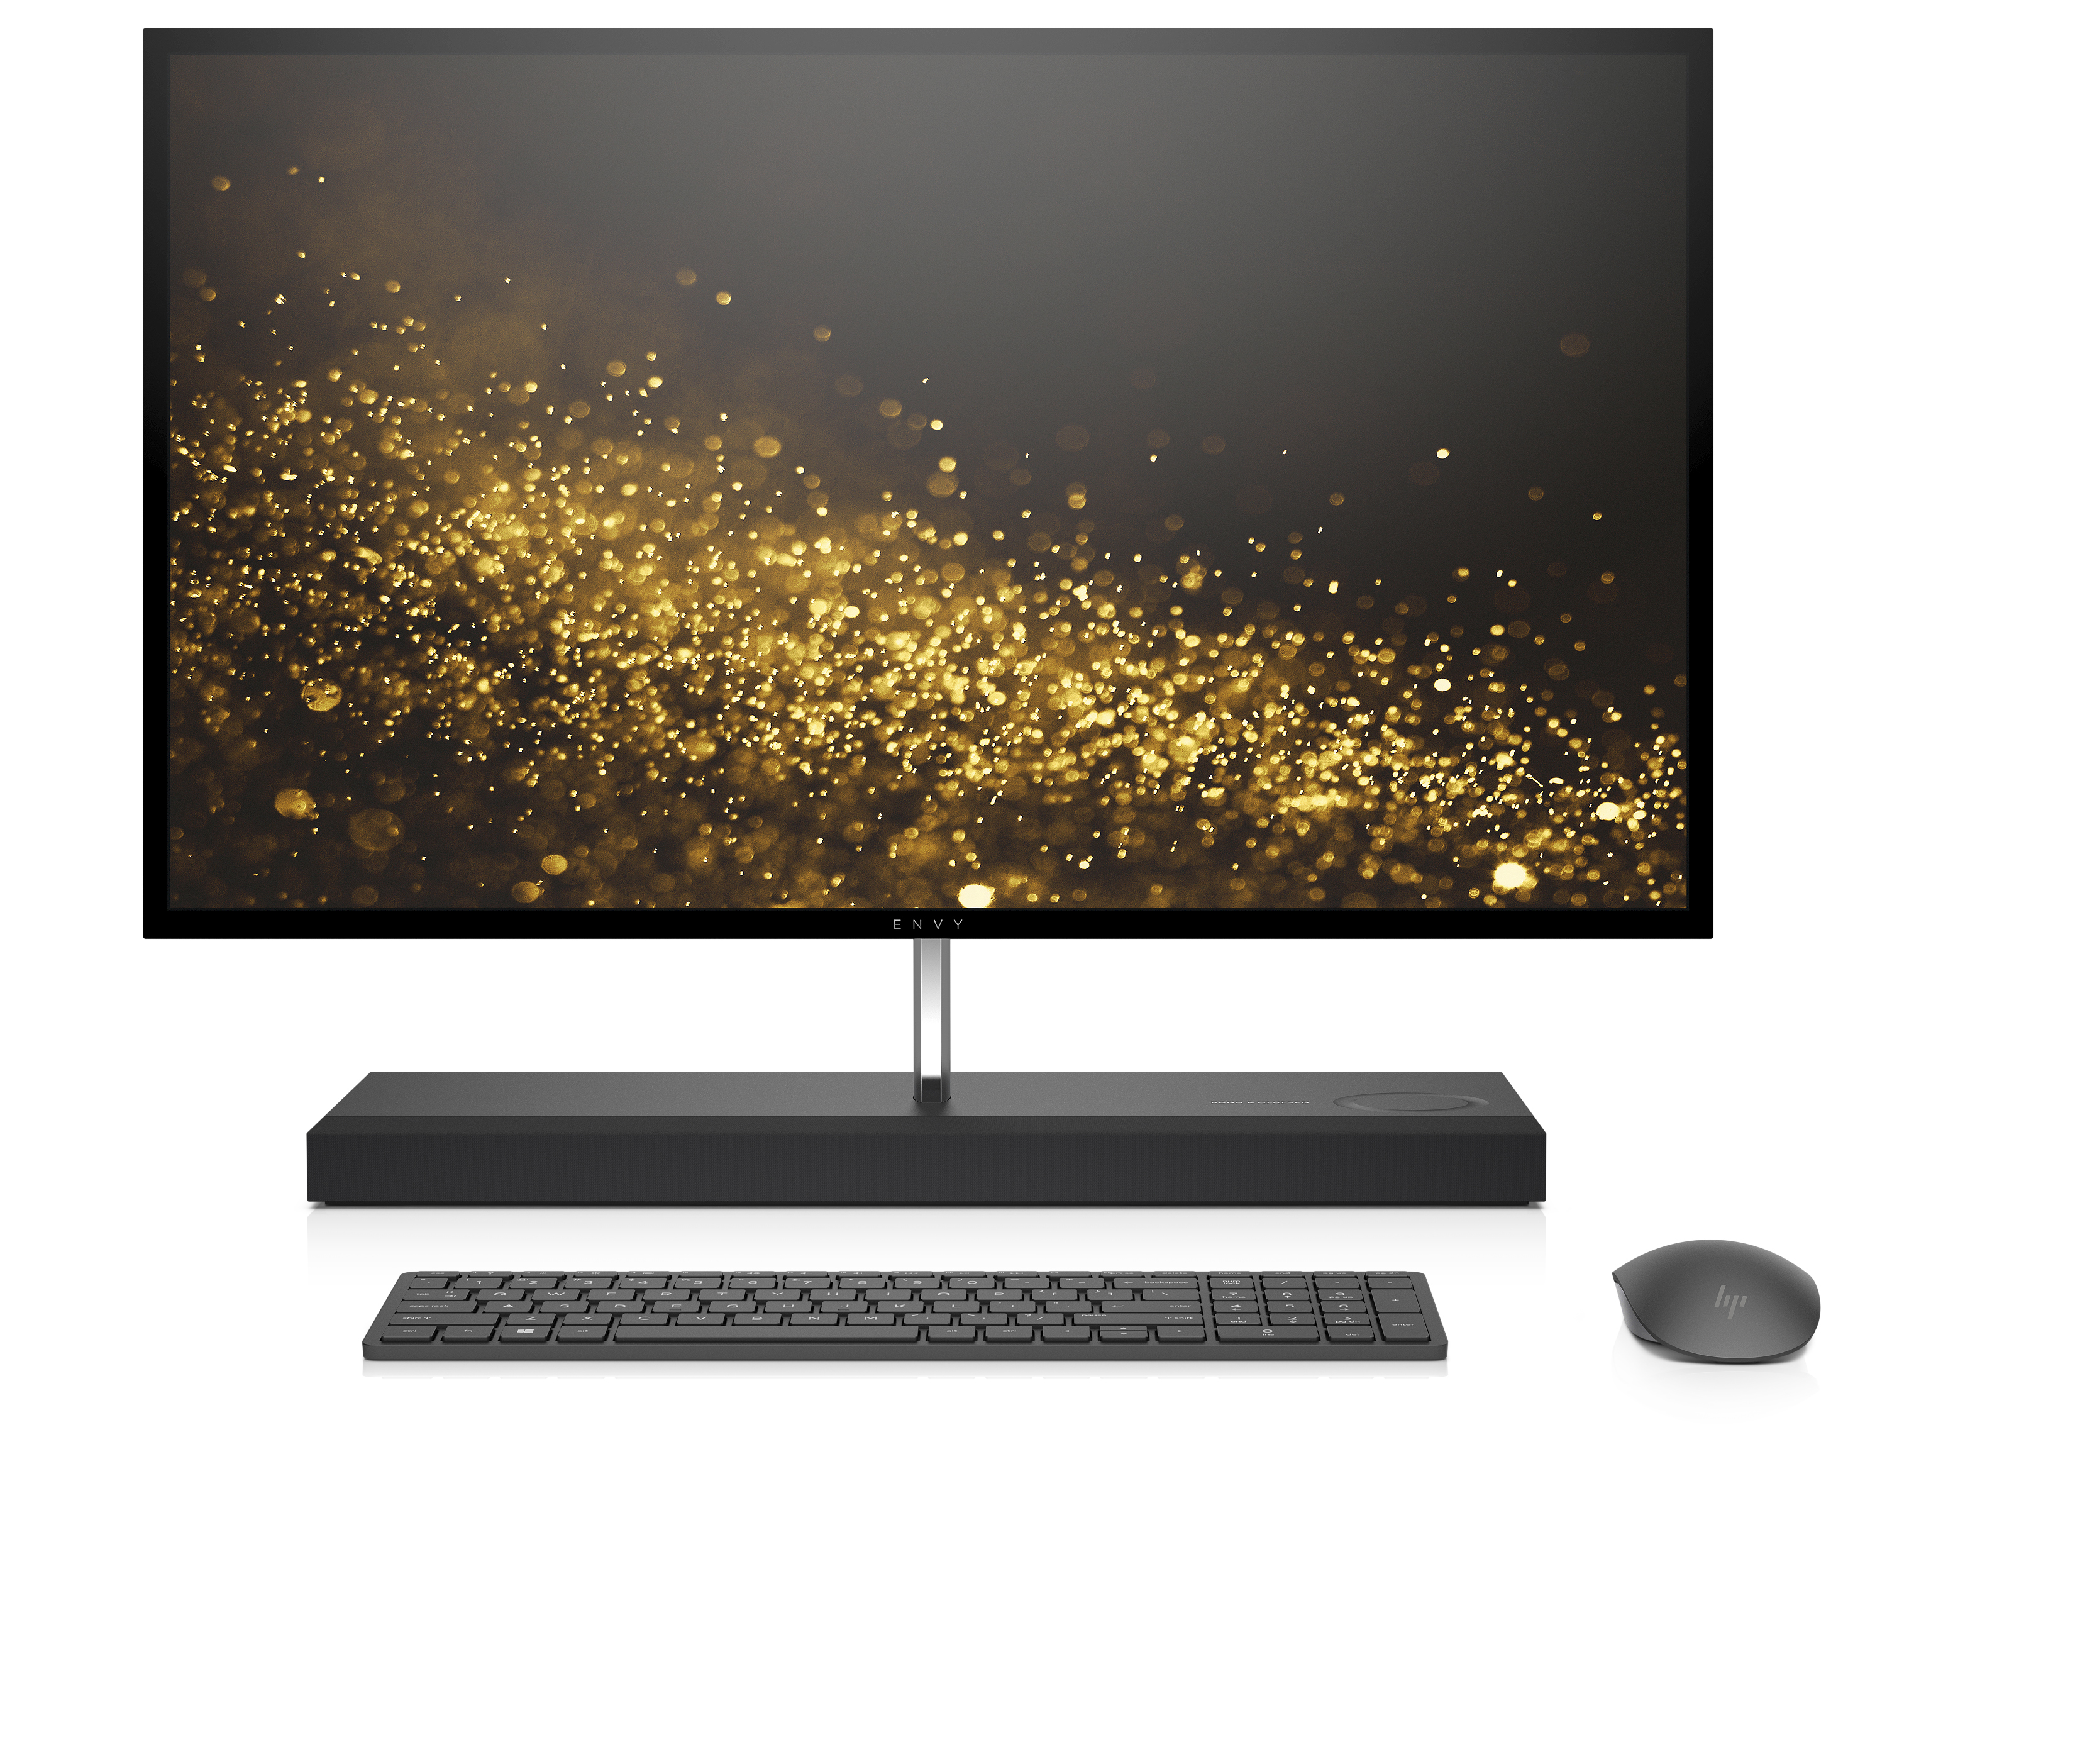 HP ENVY All-in-One 27 with Windows 10